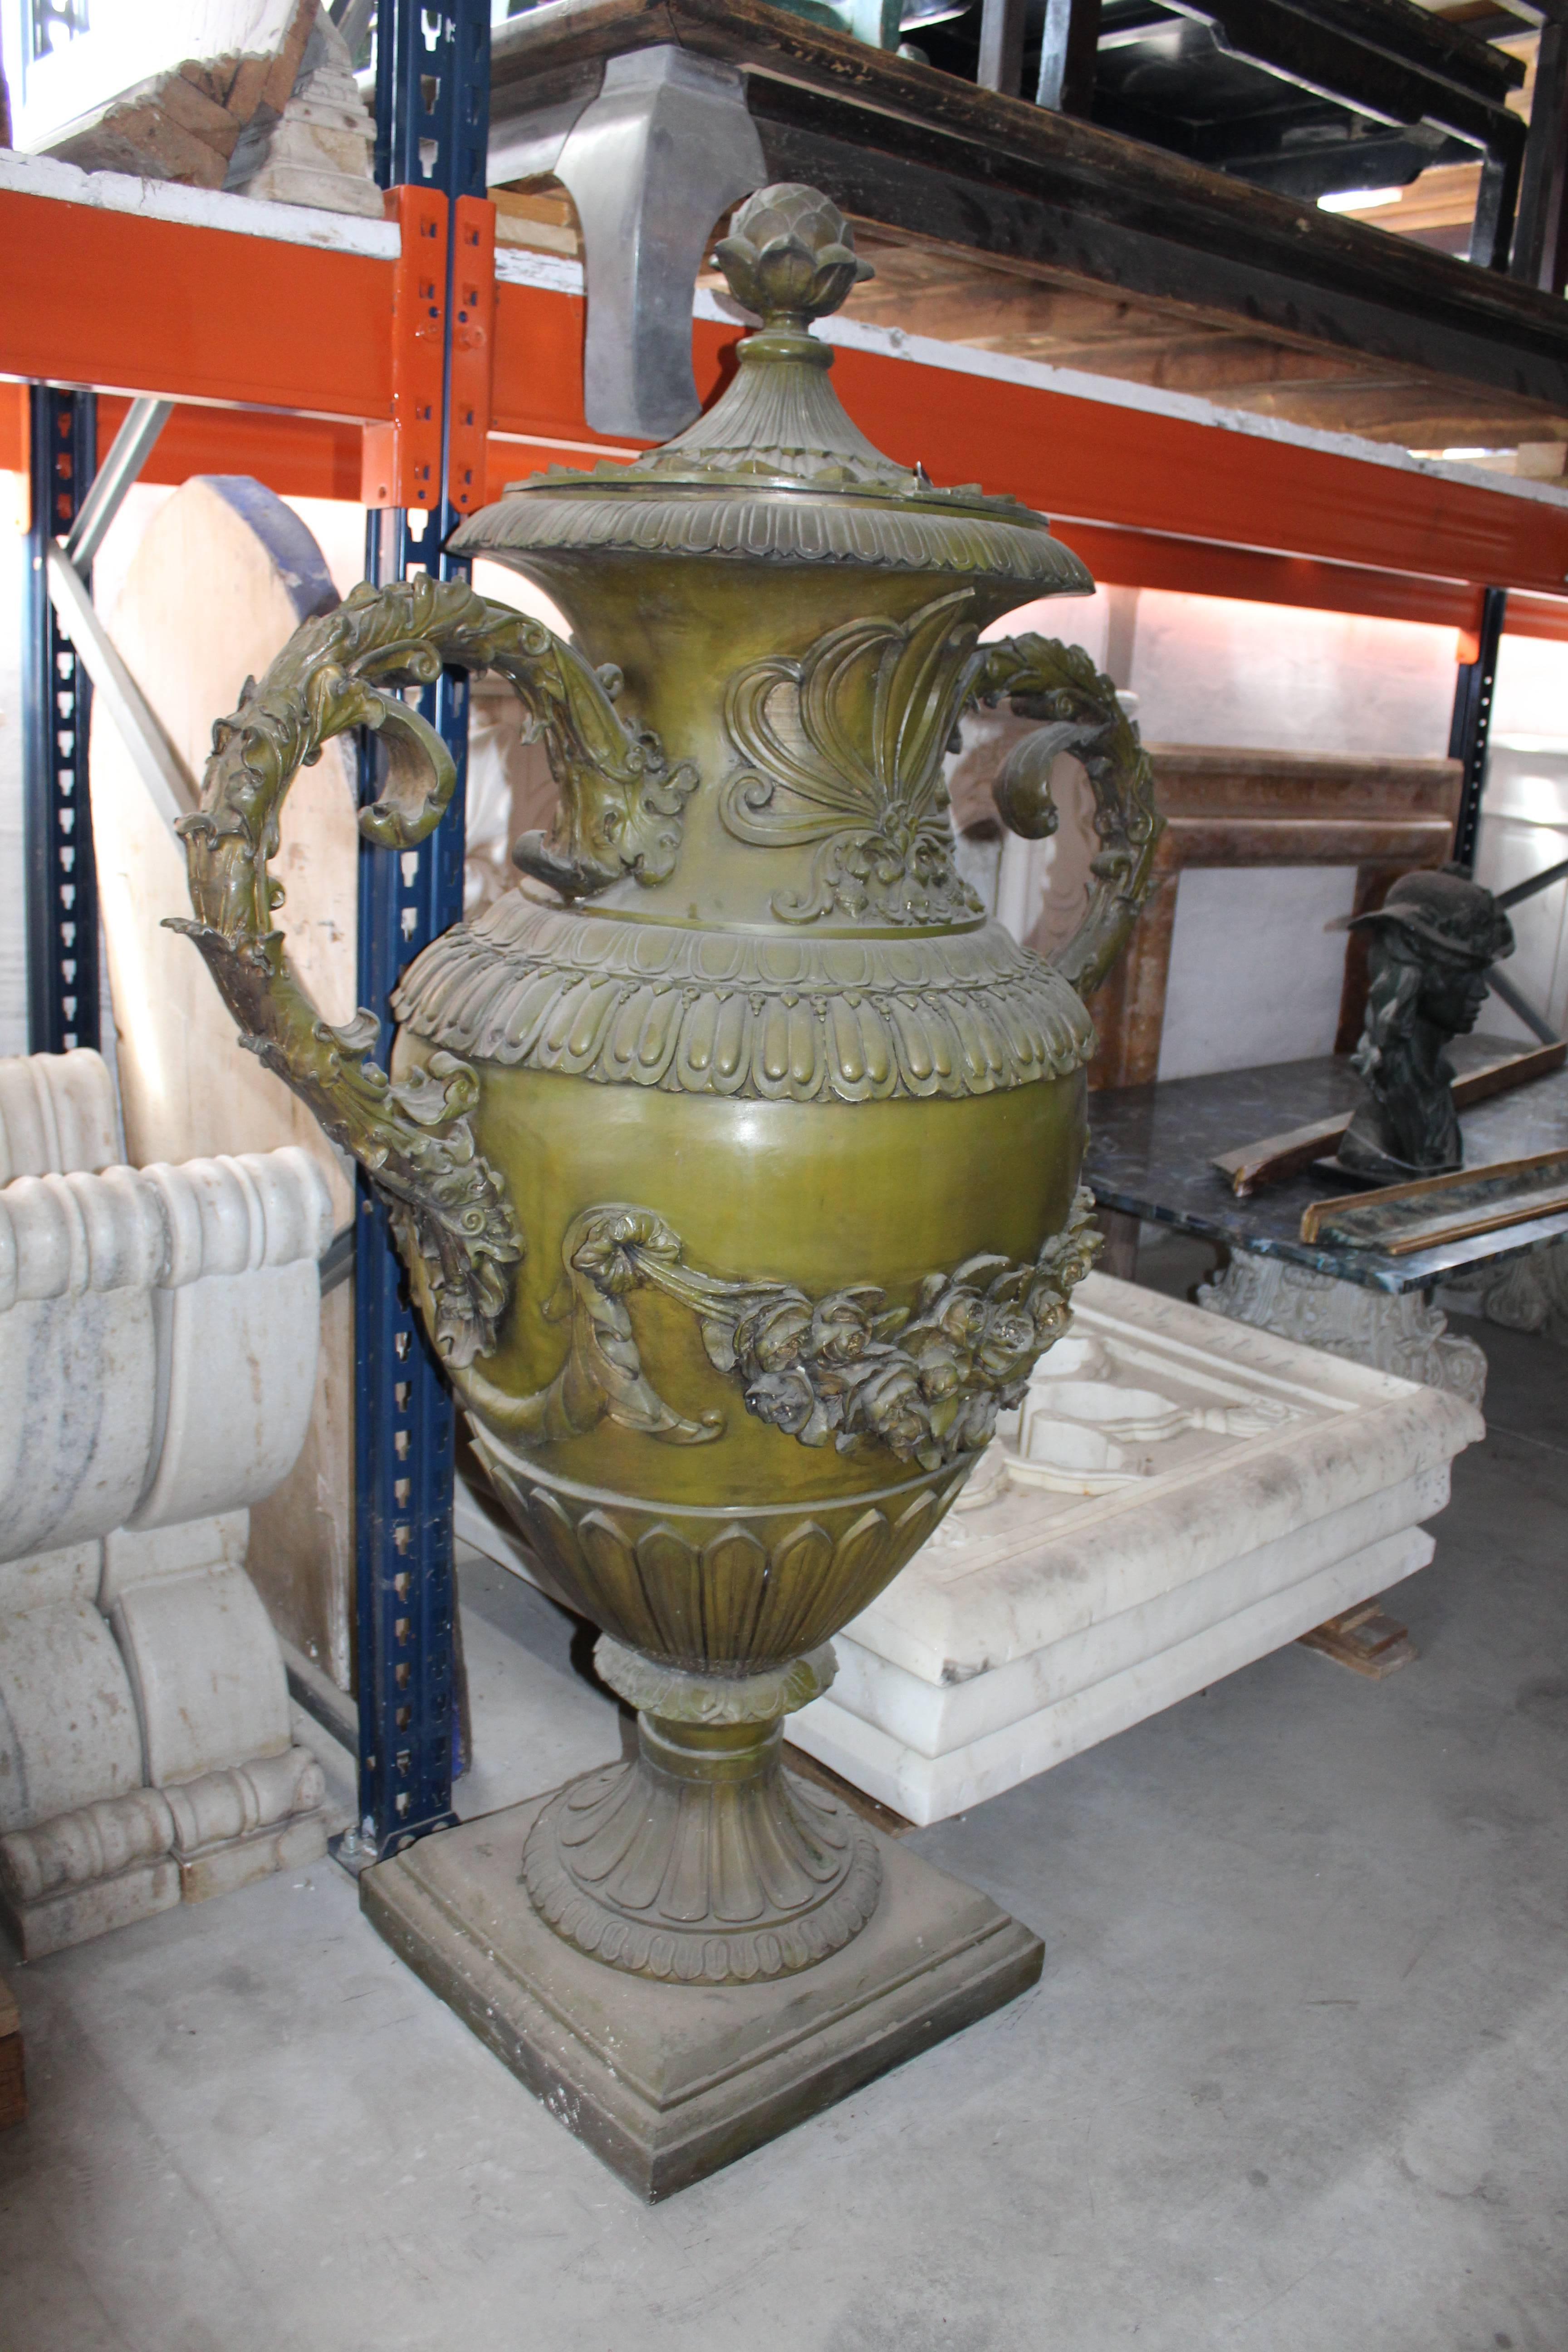 Pair of bronze urns cast using the lost wax technique, with lid and handles, decorated with strings of flower garlands.